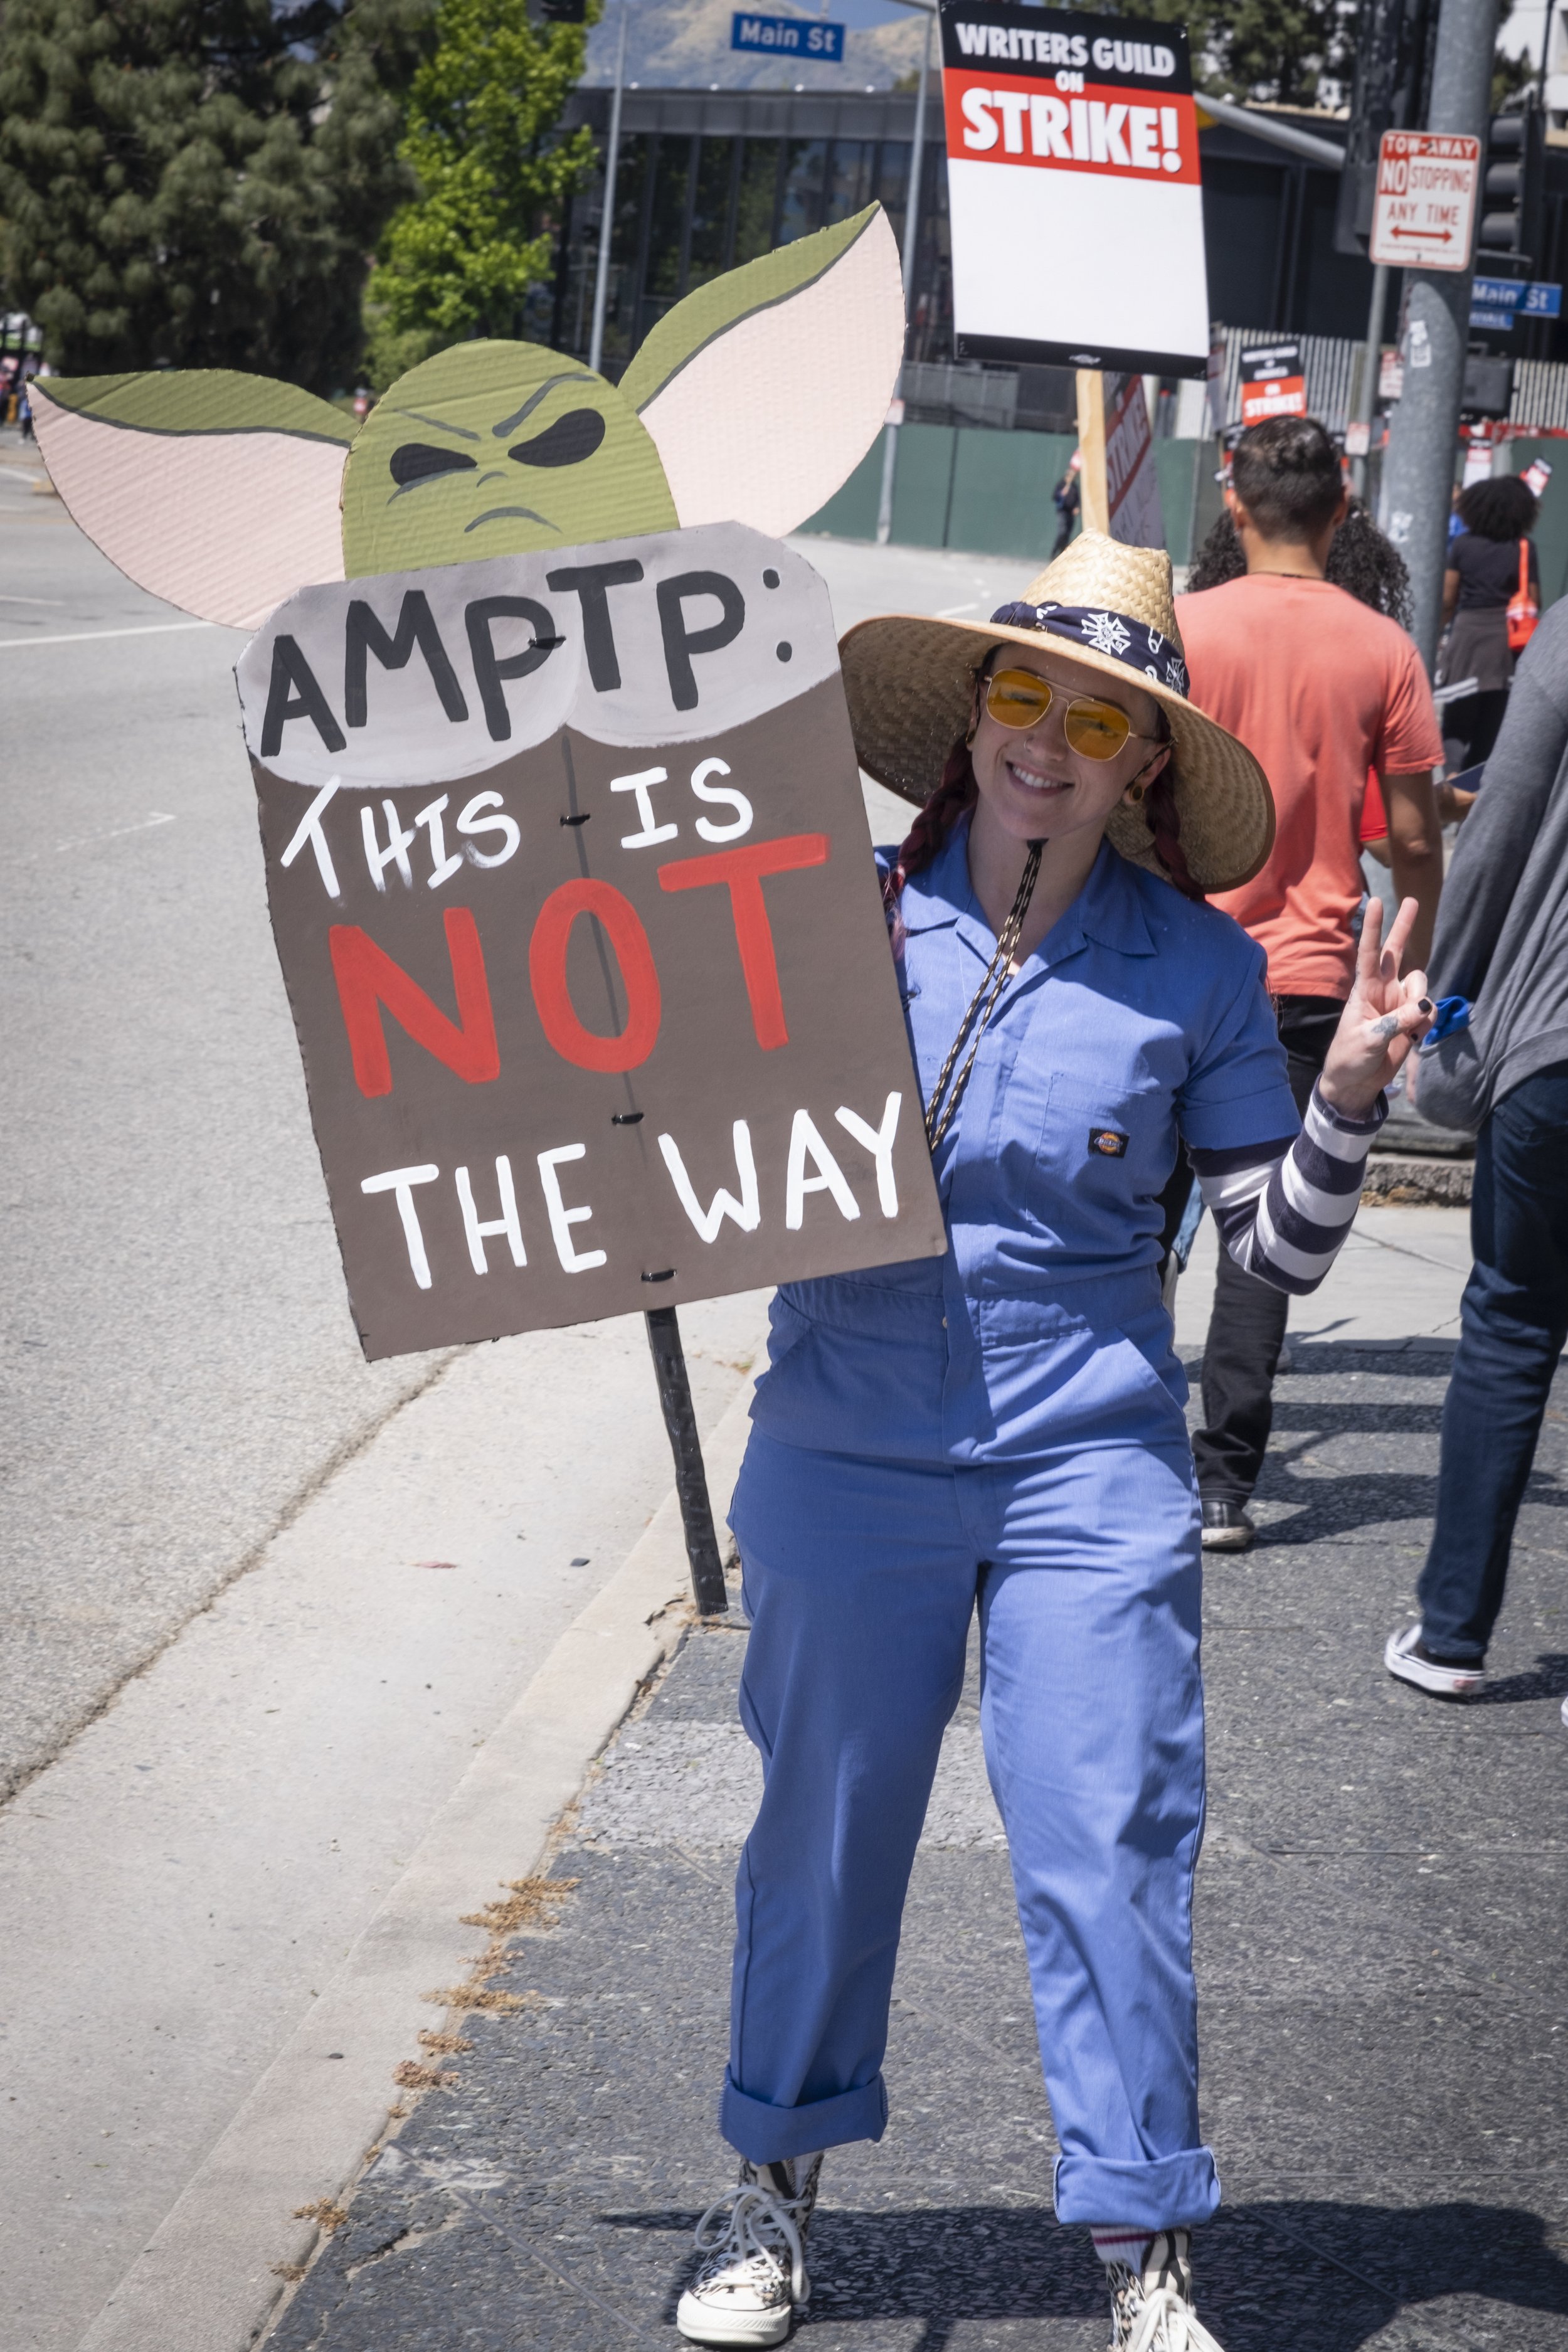  Lisa Gardener, IATSE 705 carries a sign that she made  the mando production strike, as she joins the picket in front of Universal Studios in Studio City, Calif. on Tuesday, May 2 following disagreements within negotiations between the Alliance of Mo